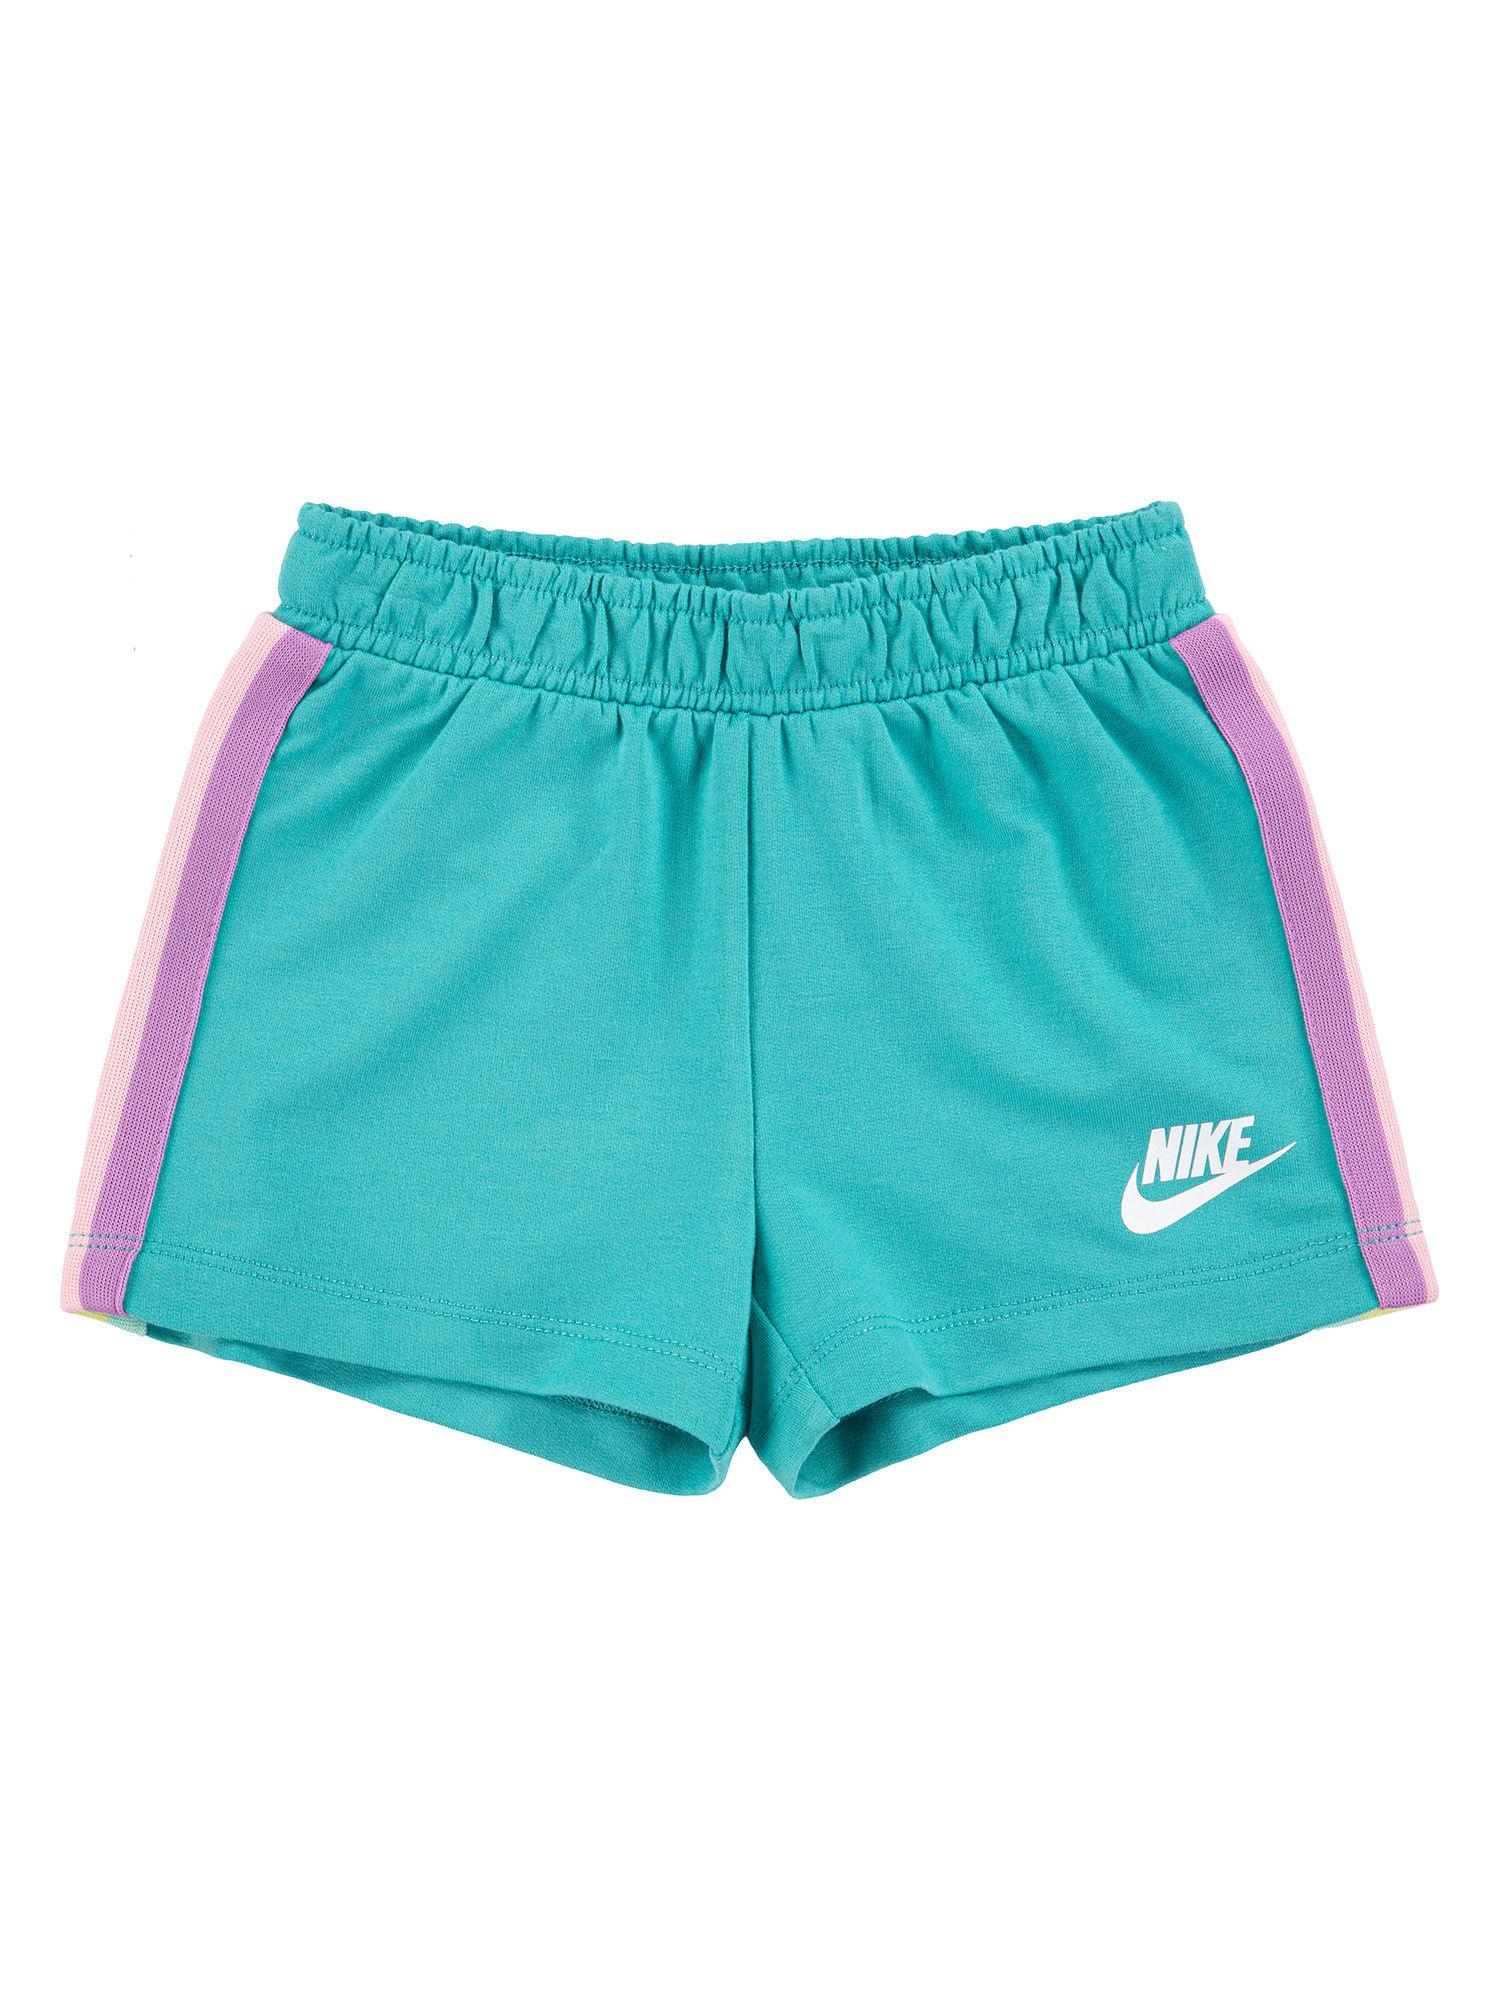 Girls Turquoise Solid Shorts